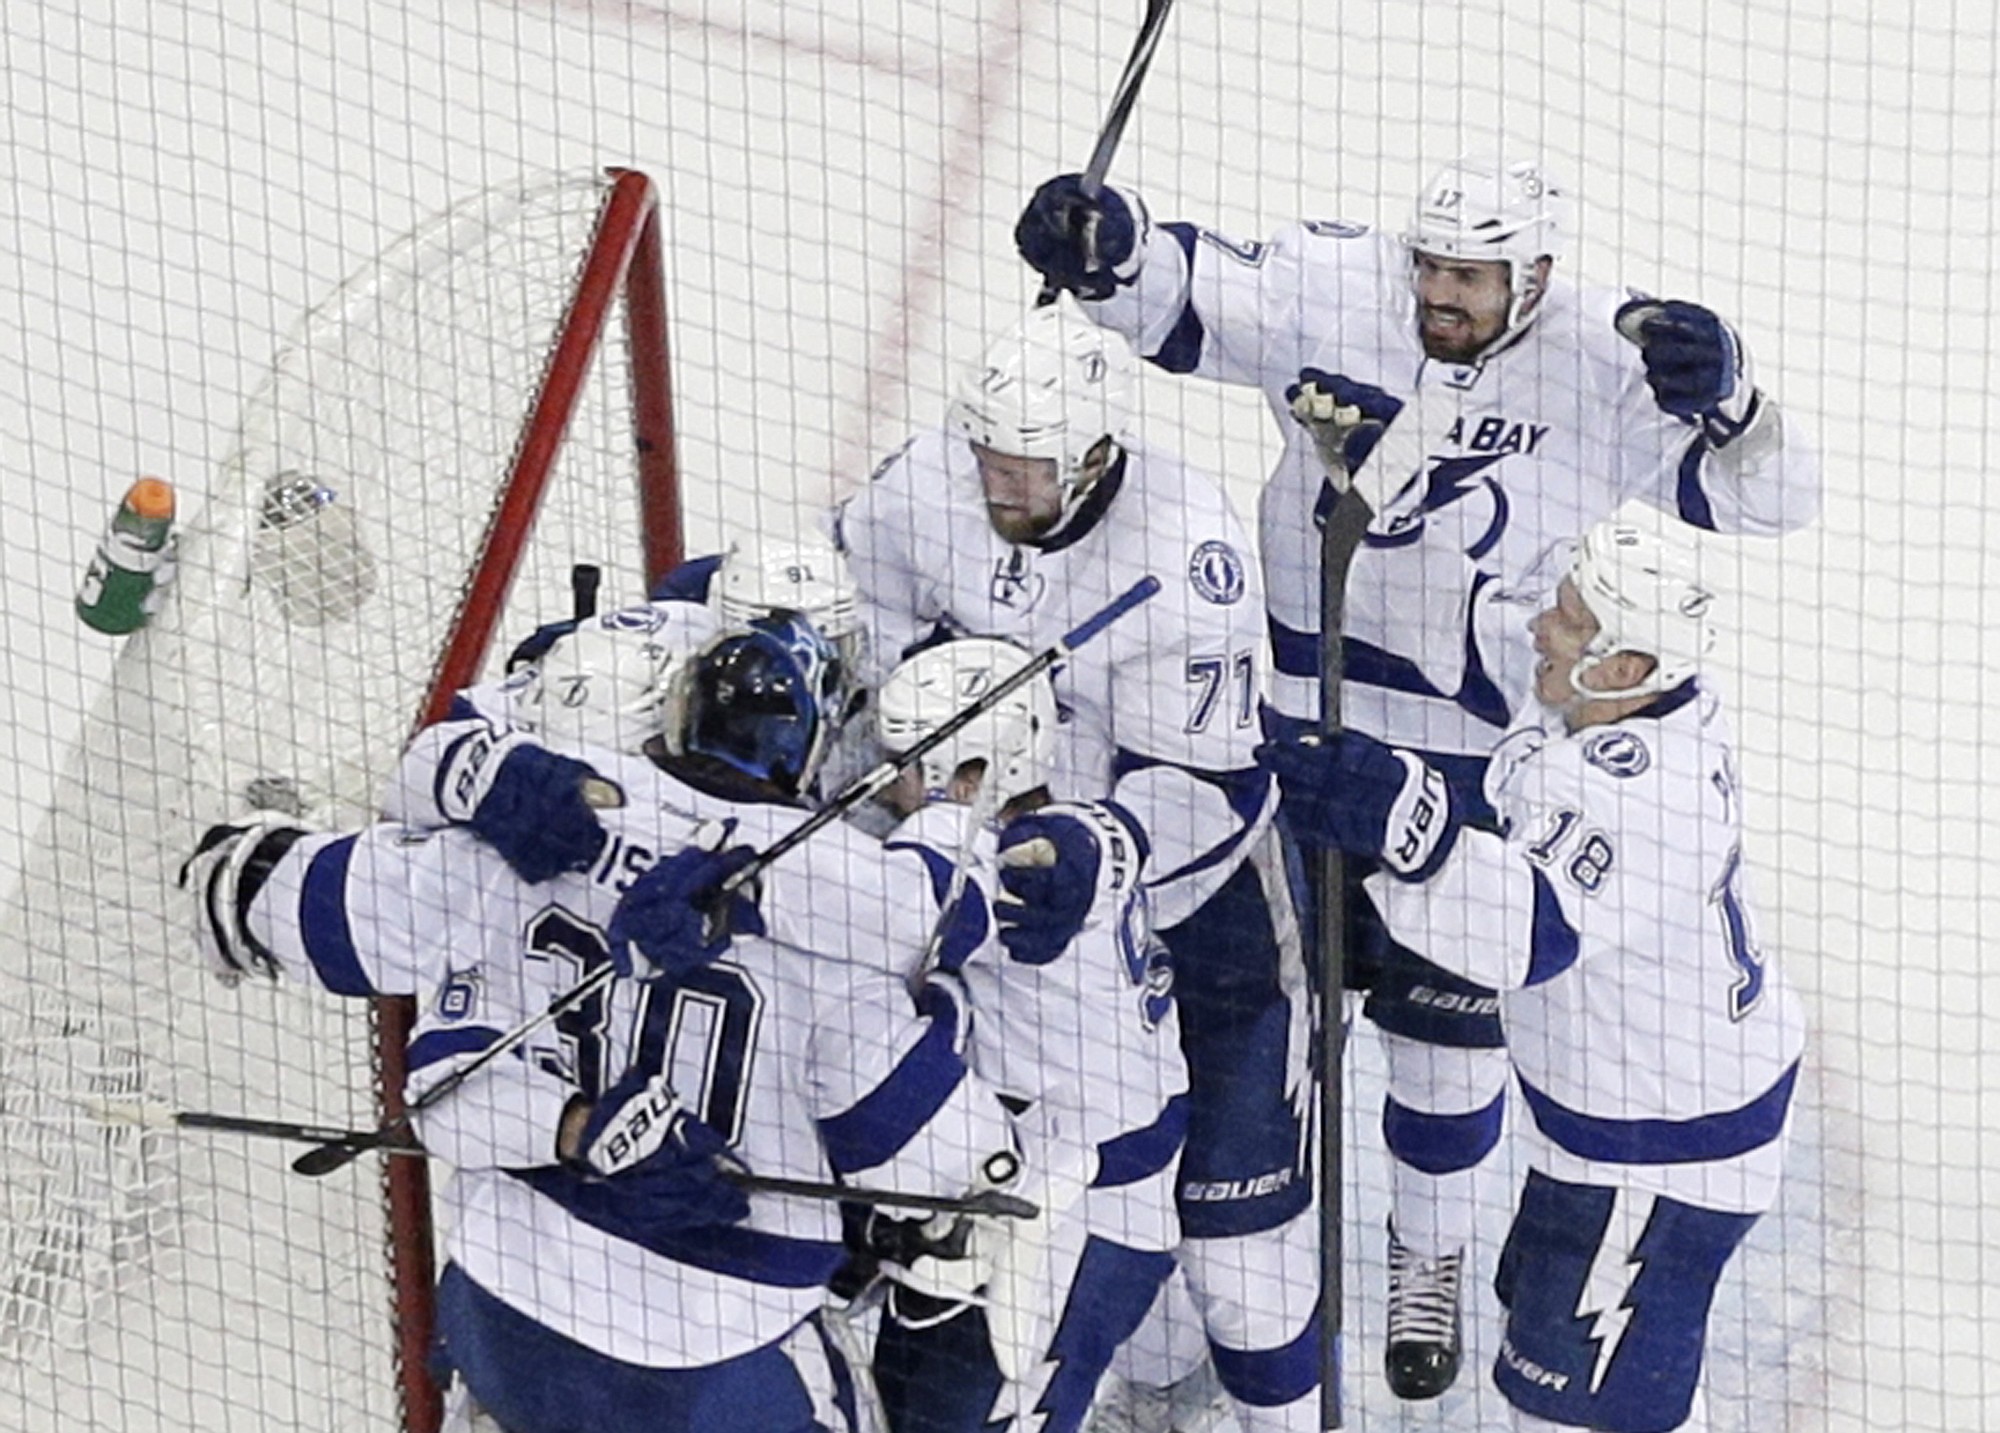 The Tampa Bay Lightning celebrate their 2-0 win over the New York Rangers in Game 7 of the Eastern Conference final, Friday, May 29, 2015, in New York.